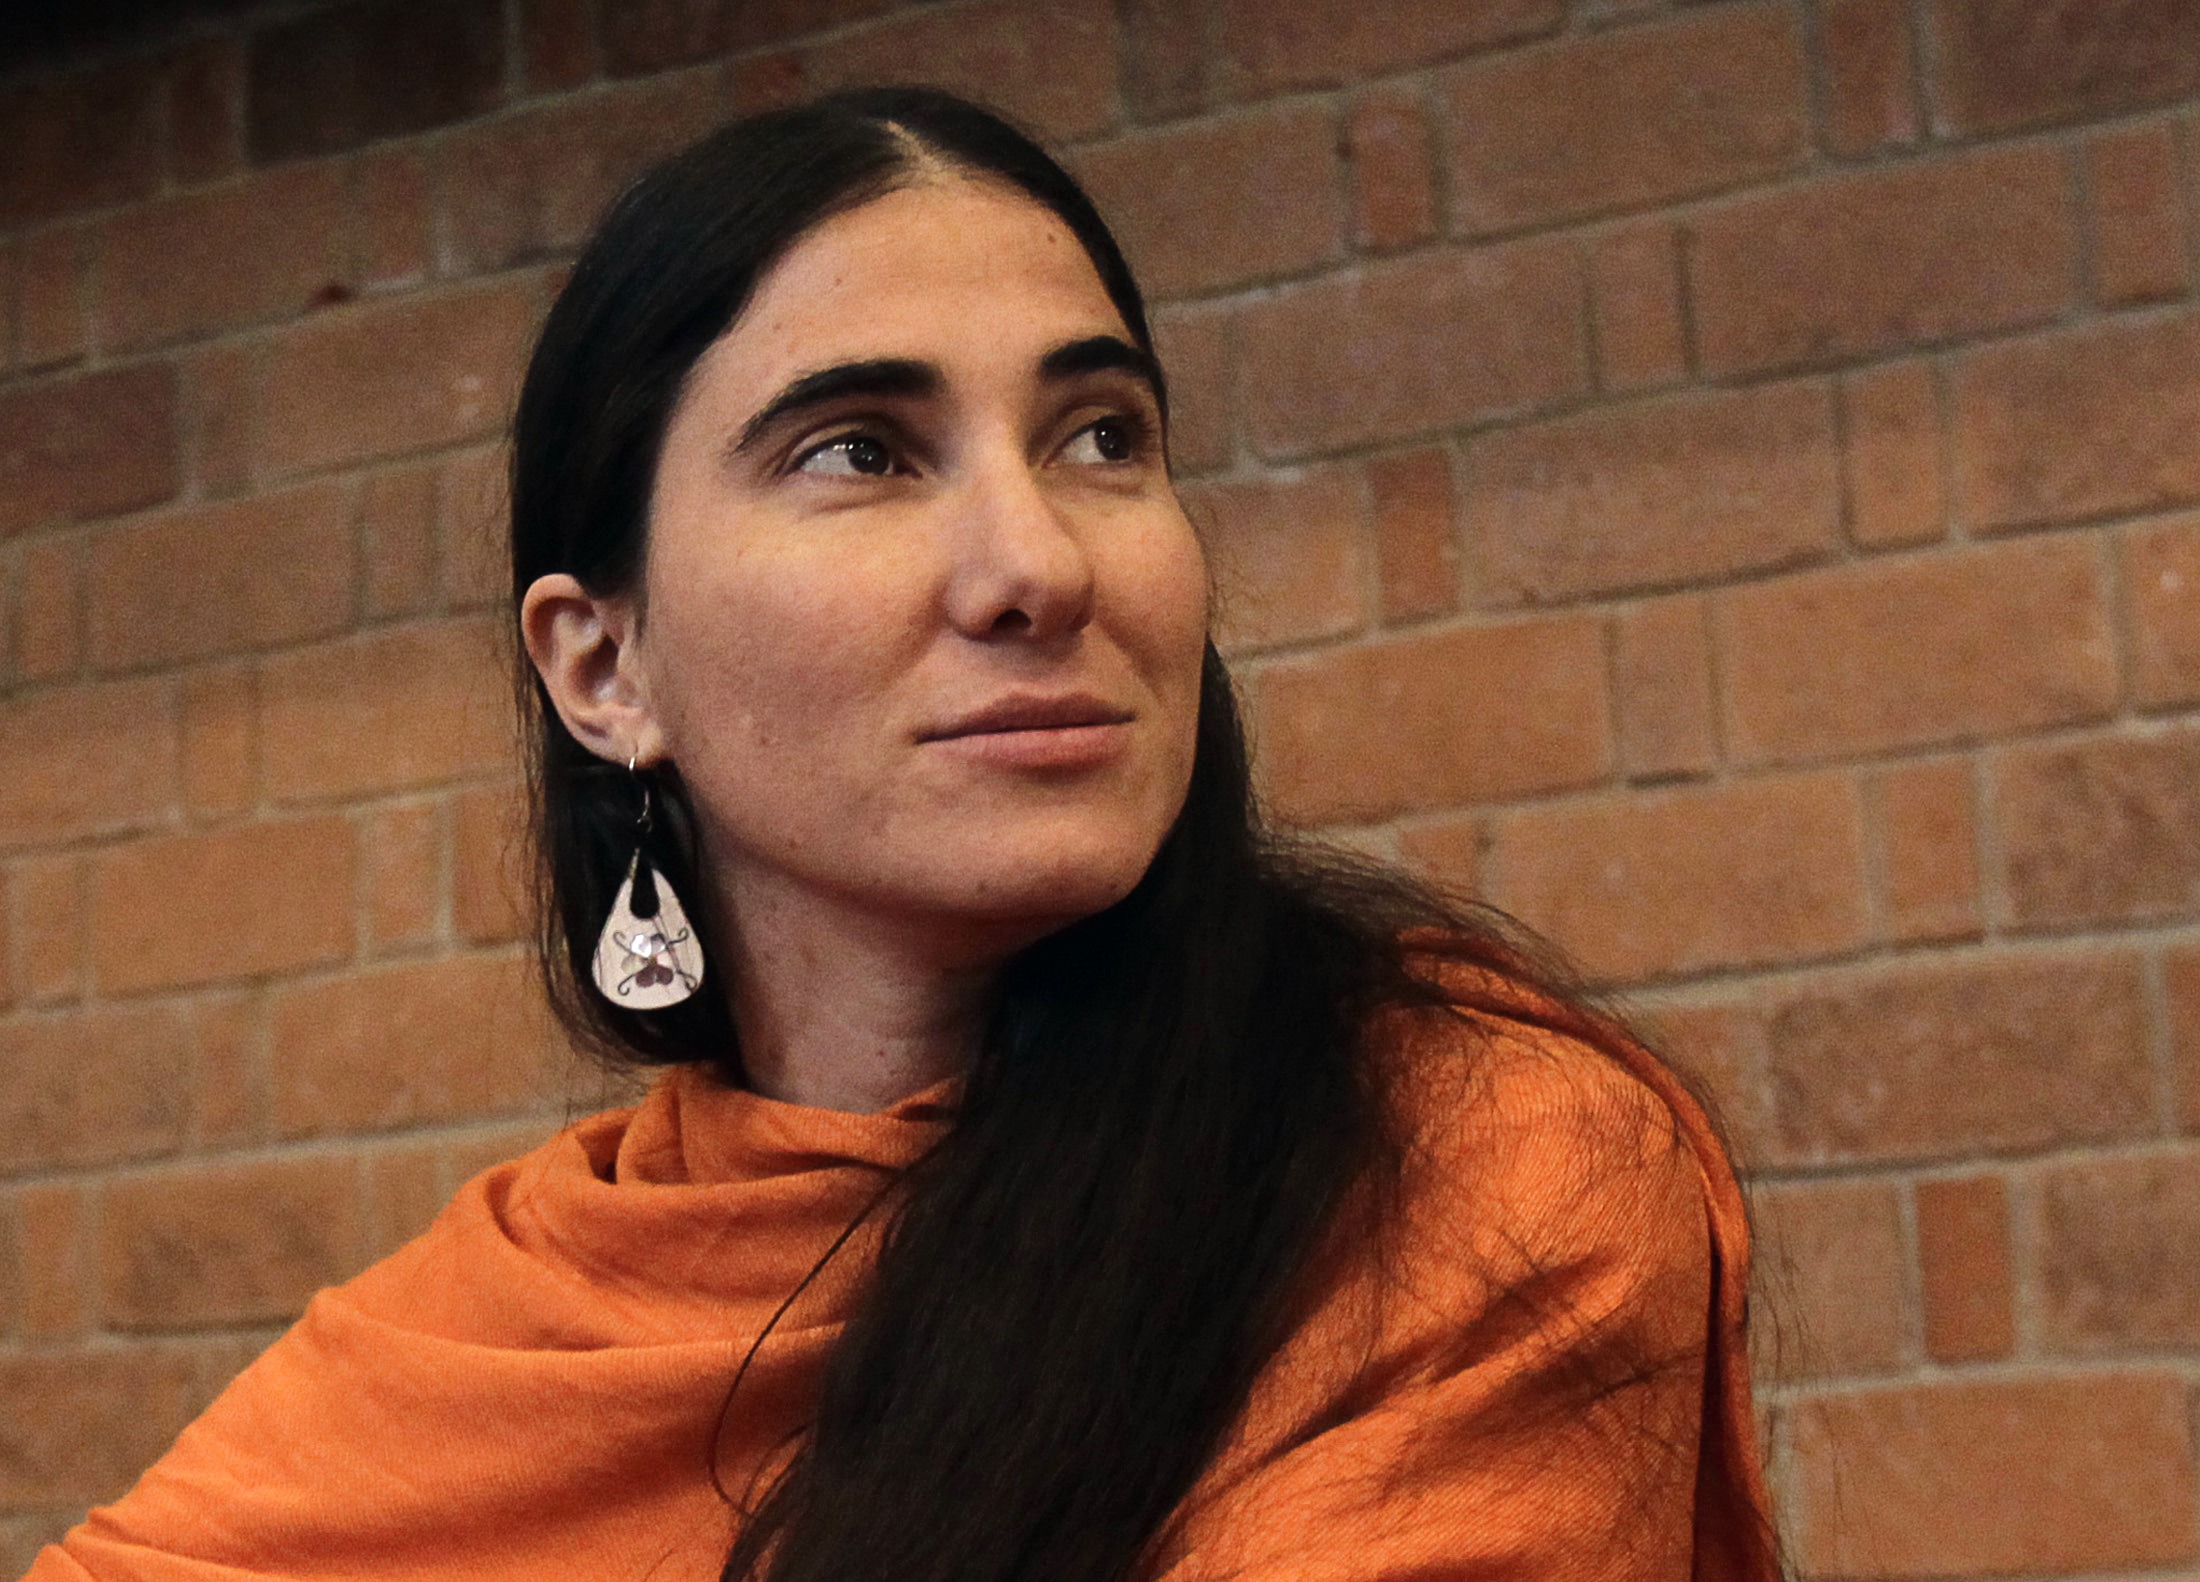 Cuba's best-known dissident blogger Yoani Sanchez listens to a question after she delivered a speech to students of the Iberoamericana University in Mexico City